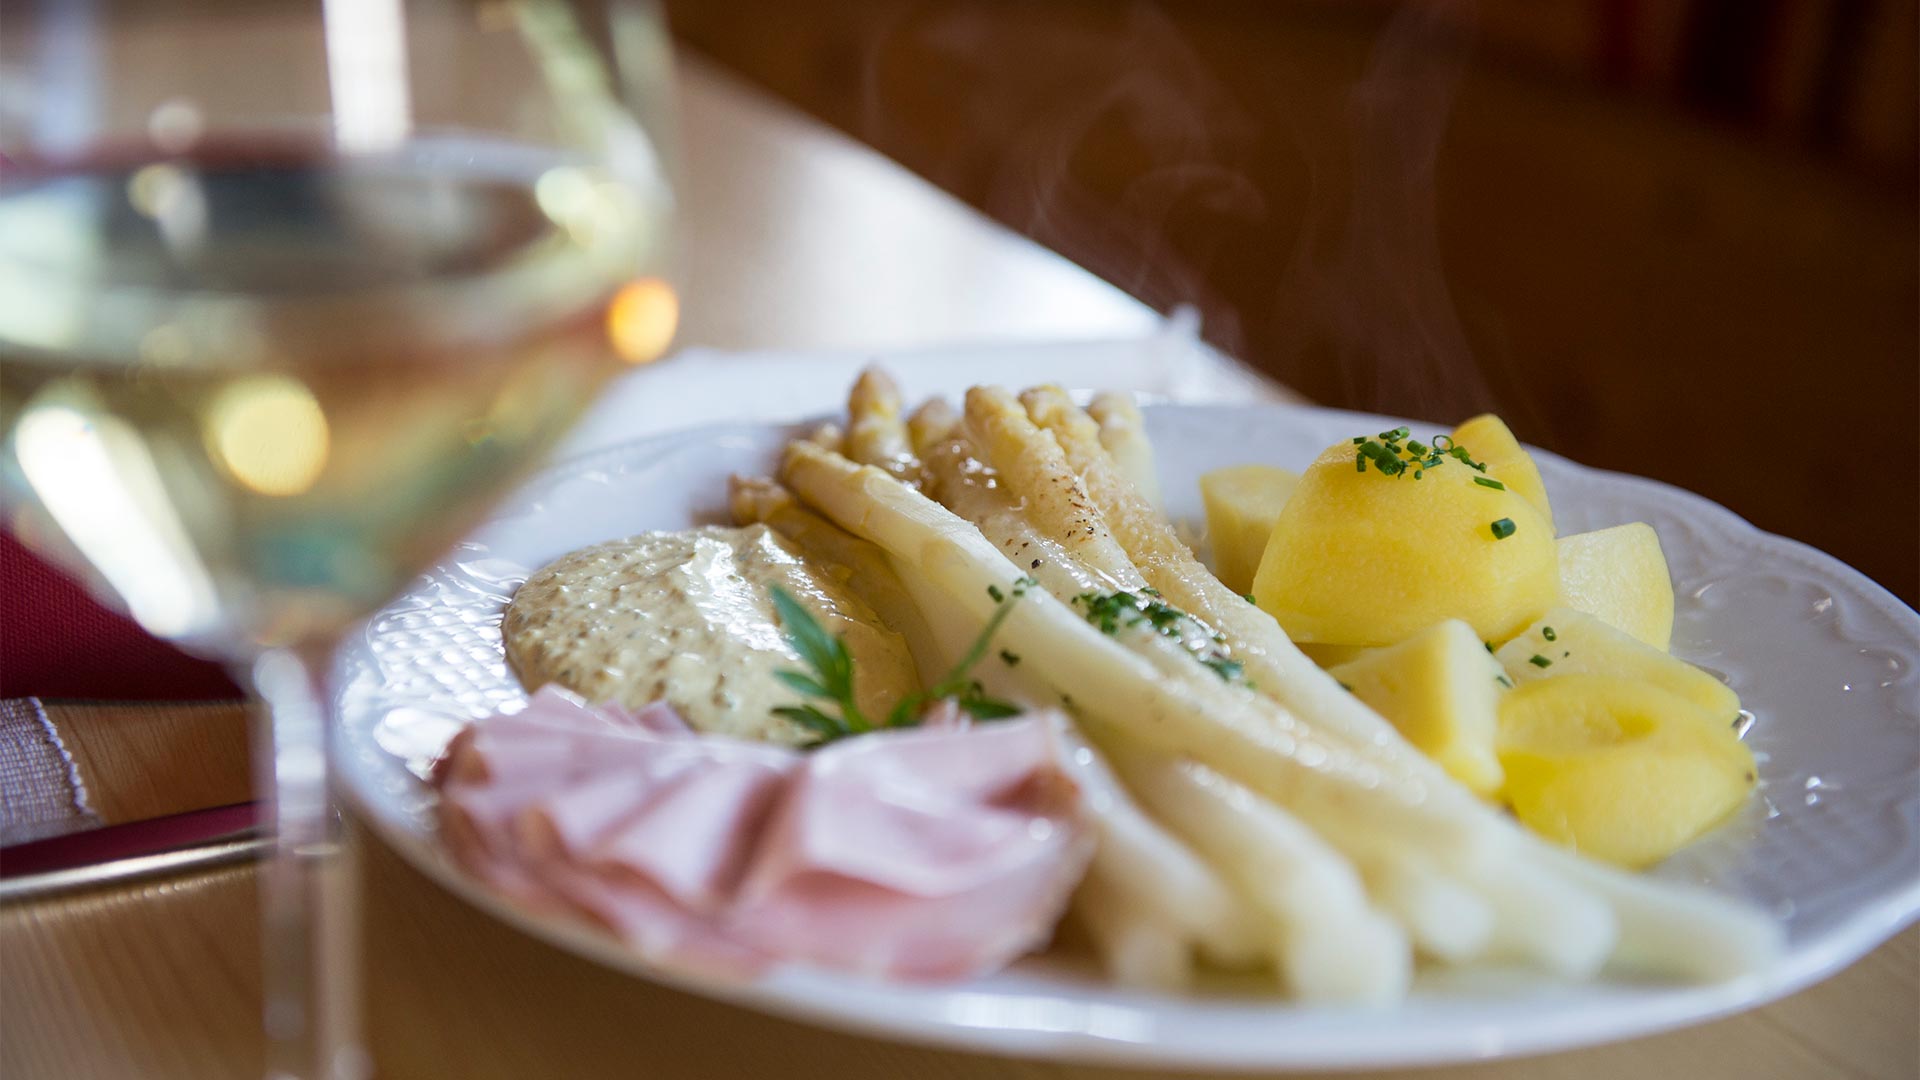 A traditional South Tyrolean dish of cooked asparagus, boiled potatoes and ham served with a glass of white wine.